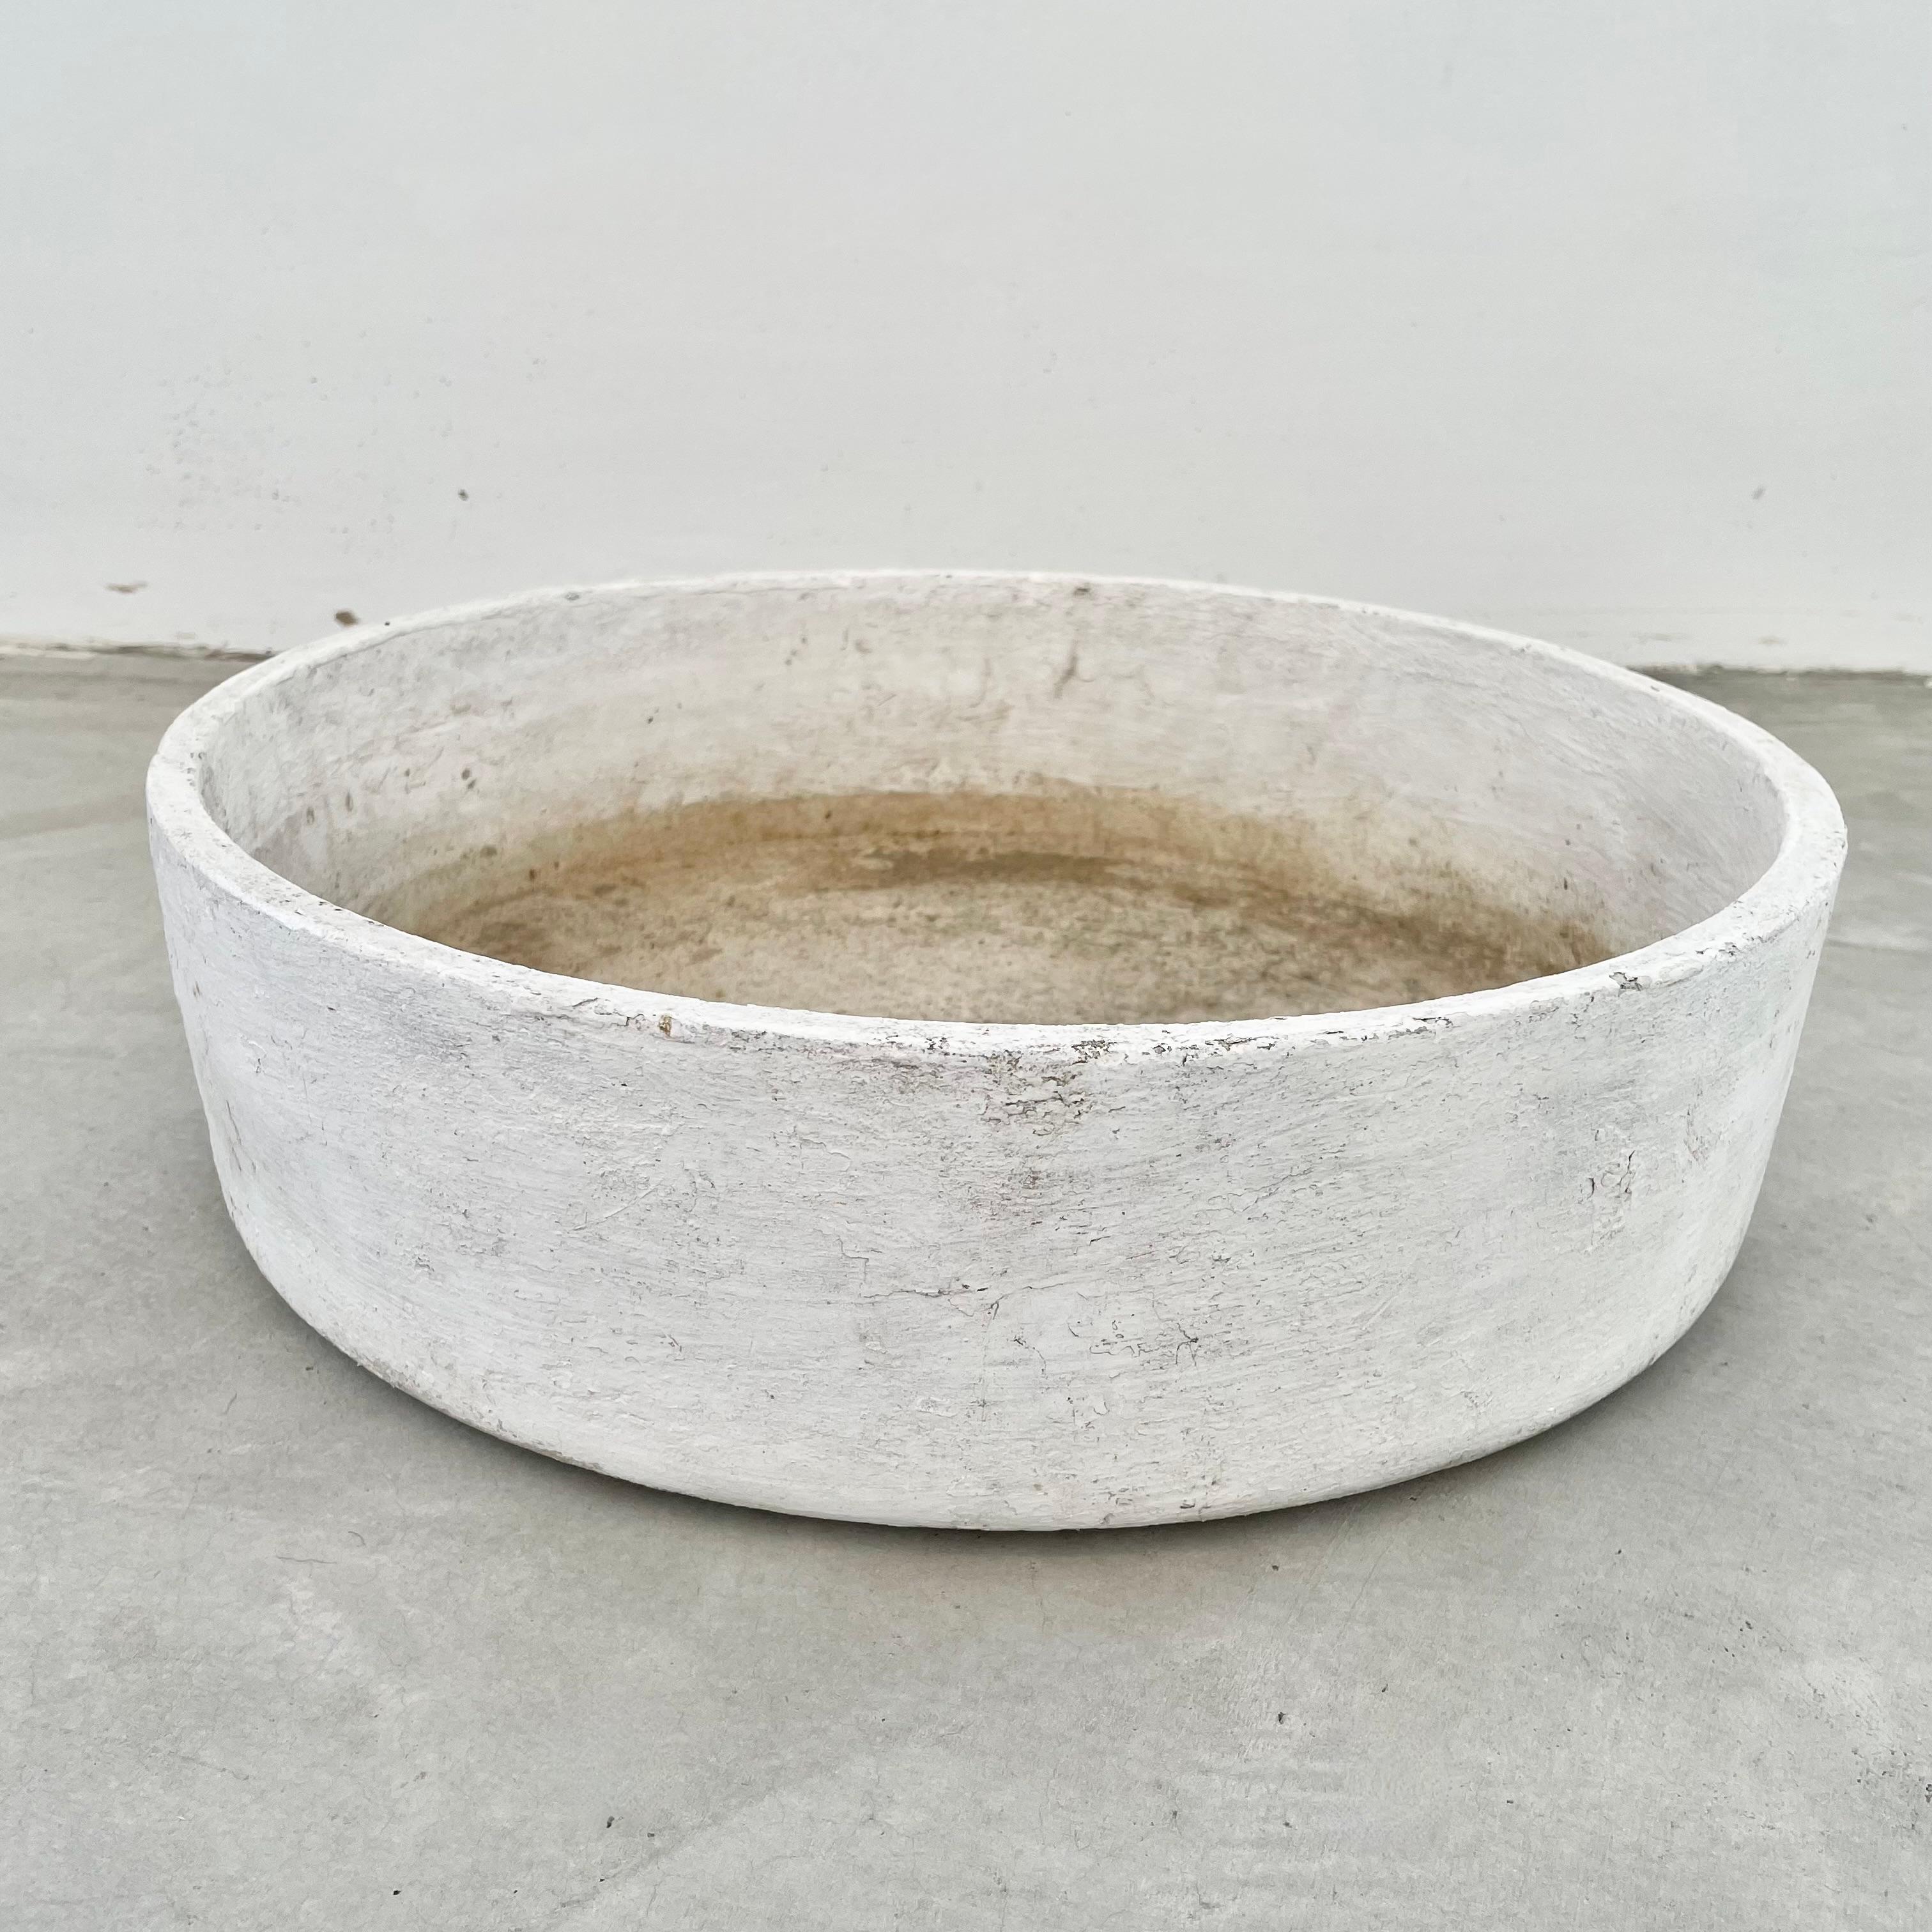 Fantastic cement dish by Swiss architect Willy Guhl for Eternit. Light white and grey patina. Simple and minimal design but perfect for succulents or even as a bowl. Good vintage condition. 1 available.